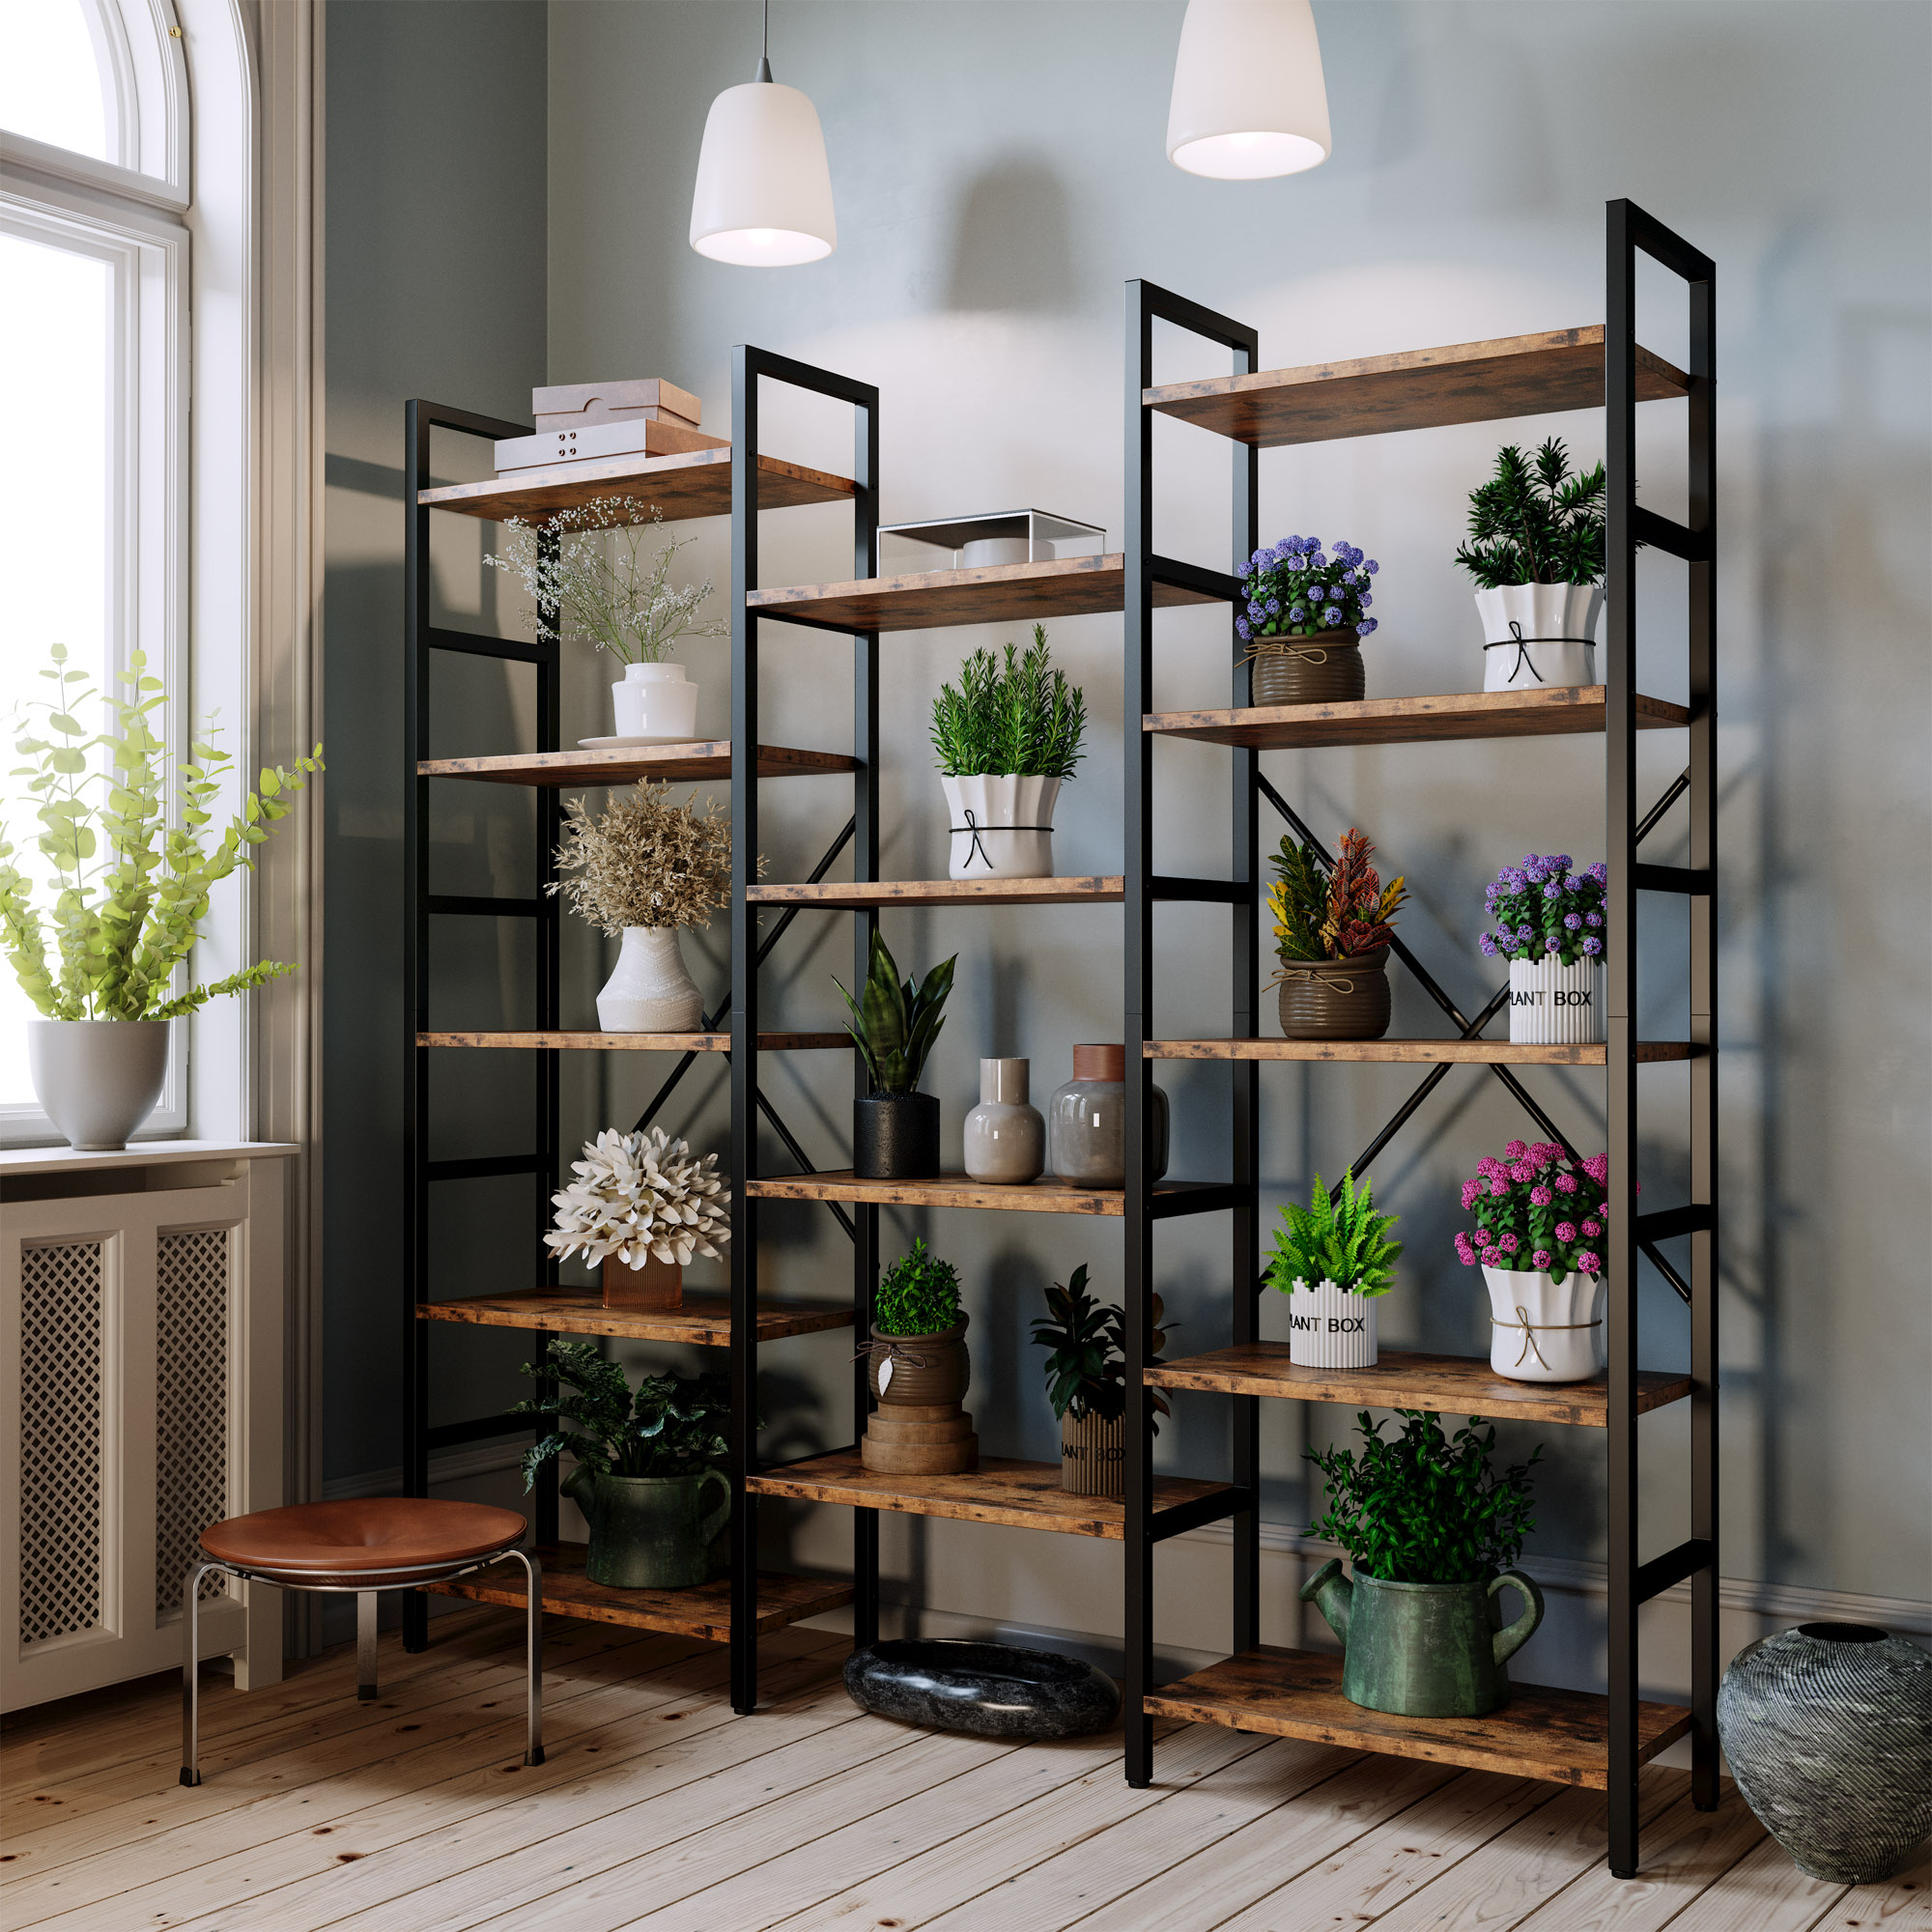 17 Stories Bookcases and Bookshelves Triple Wide 5 Tiers Industrial Bookshelf, Large Etagere Bookshelf Open Display Shelves with Metal Frame for Livin